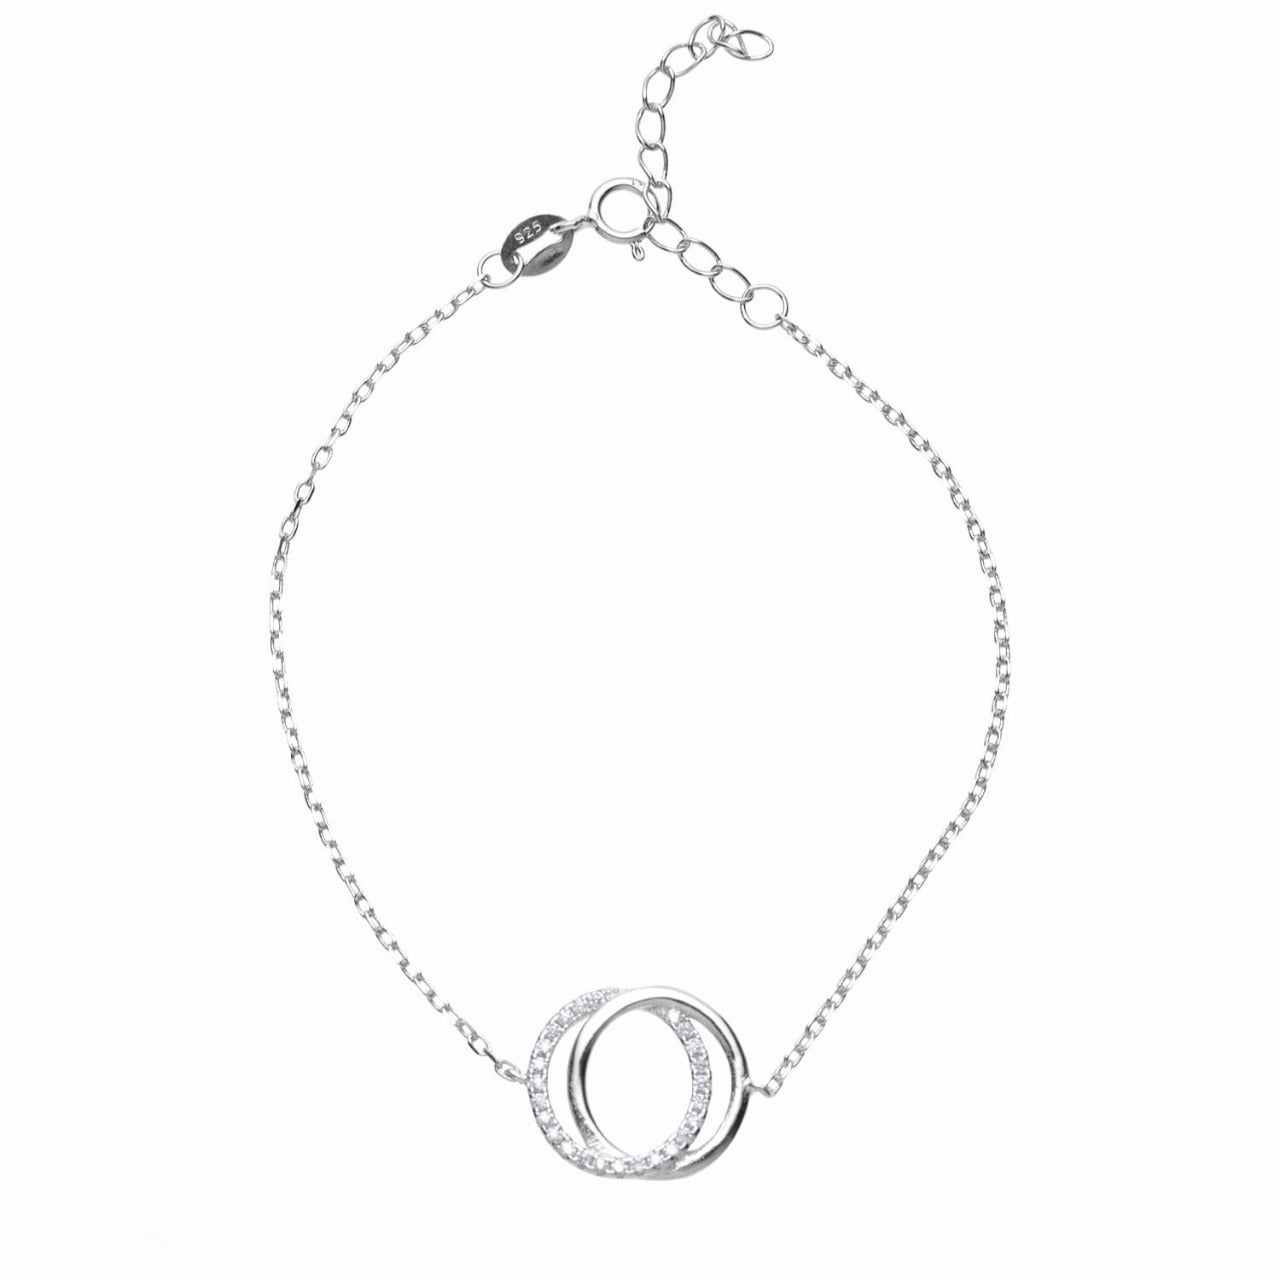 Siler Interlocked Circle Bracelet by Kilkenny Silver   Sterling silver bracelet with clear colour cubic zirconia stones.